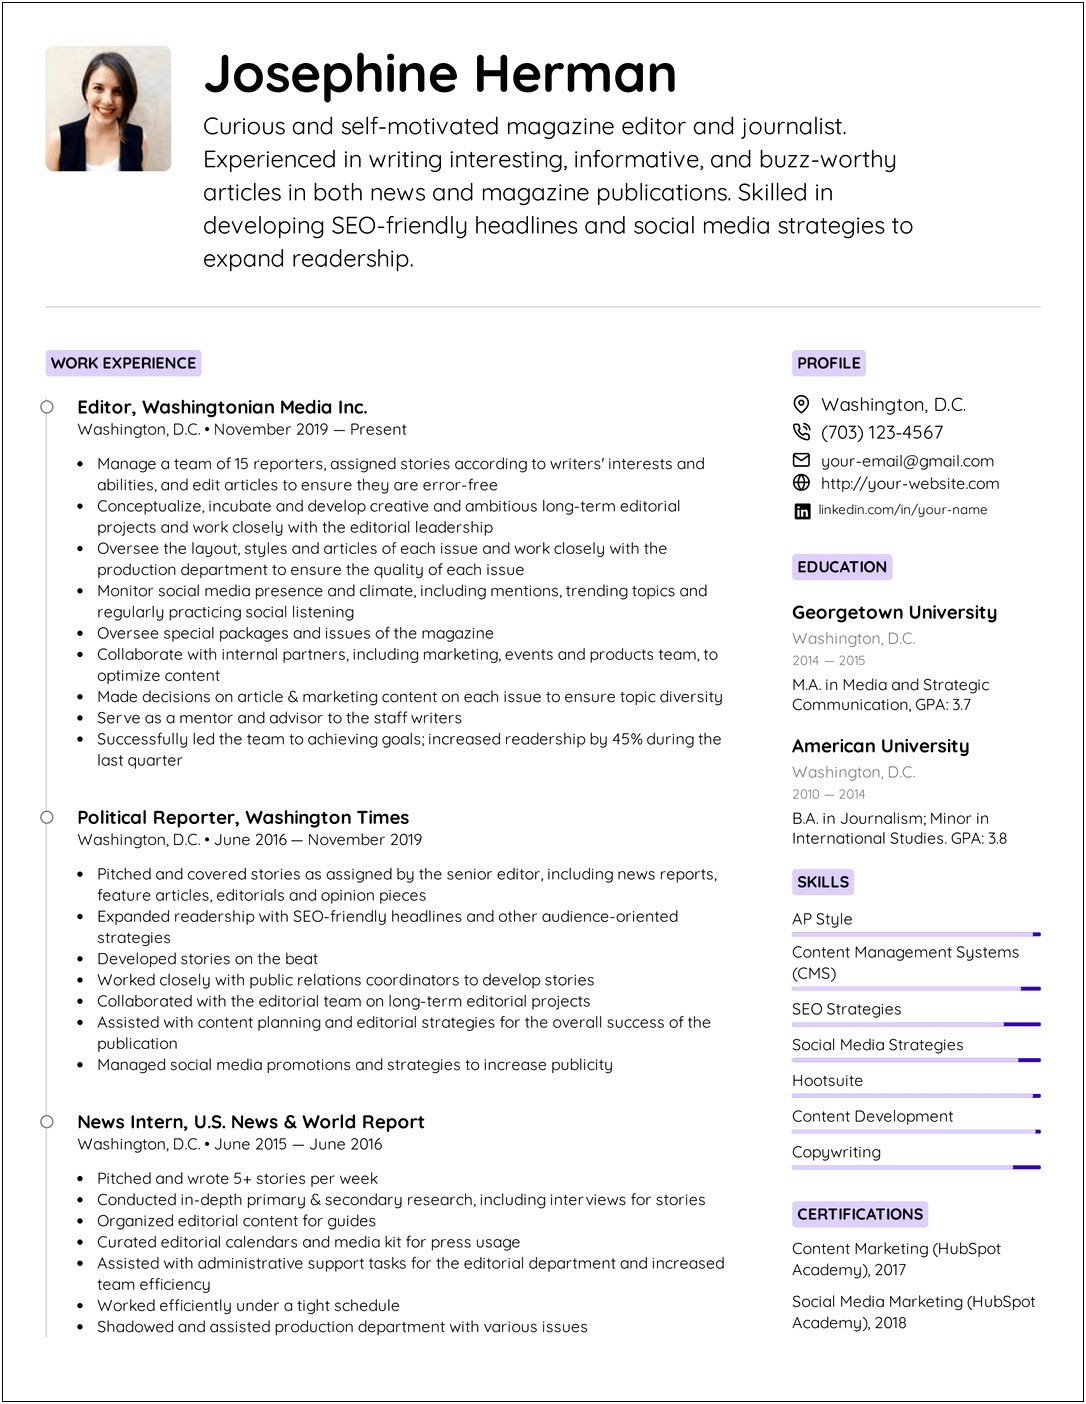 Functional Resume Examples For Administrative Assistant